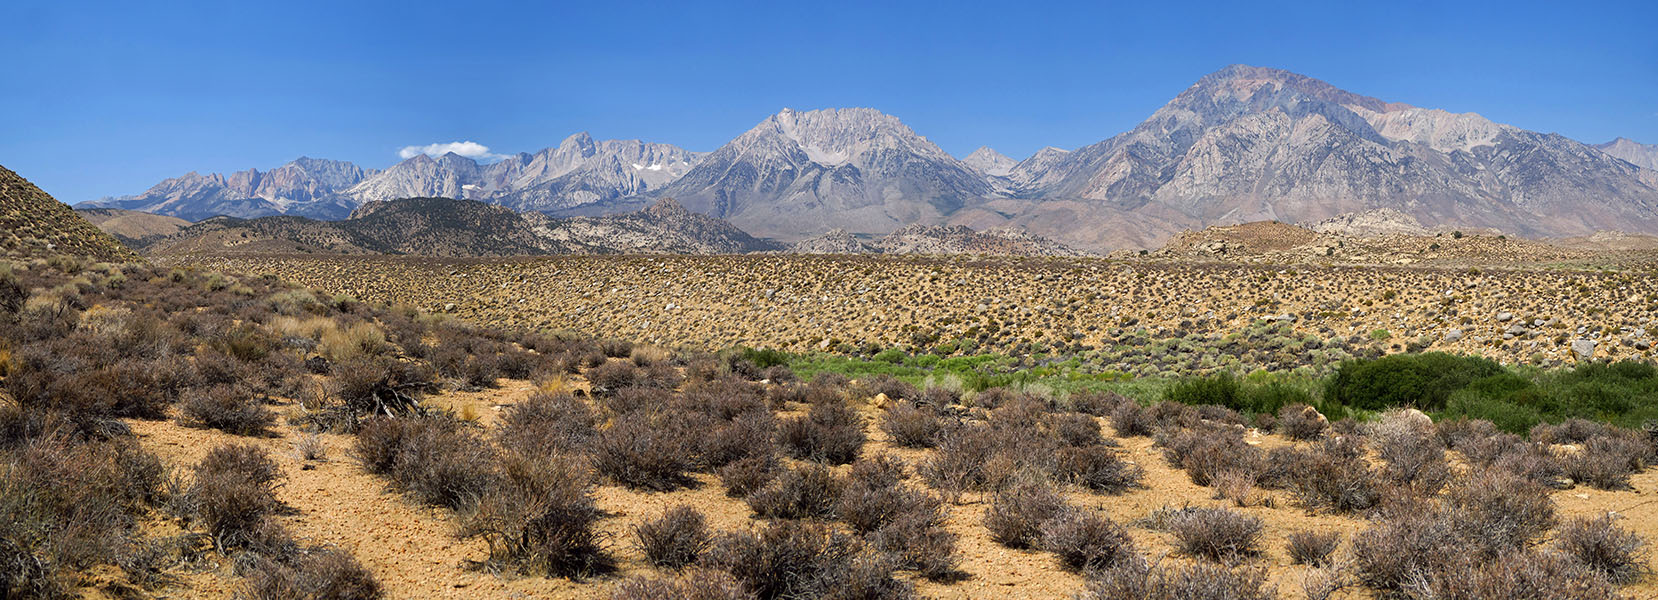 panorama: Mt. Emerson, Mt. Humpreys, & Mt. Tom [California SR-168, Inyo National Forest, Inyo County, California]